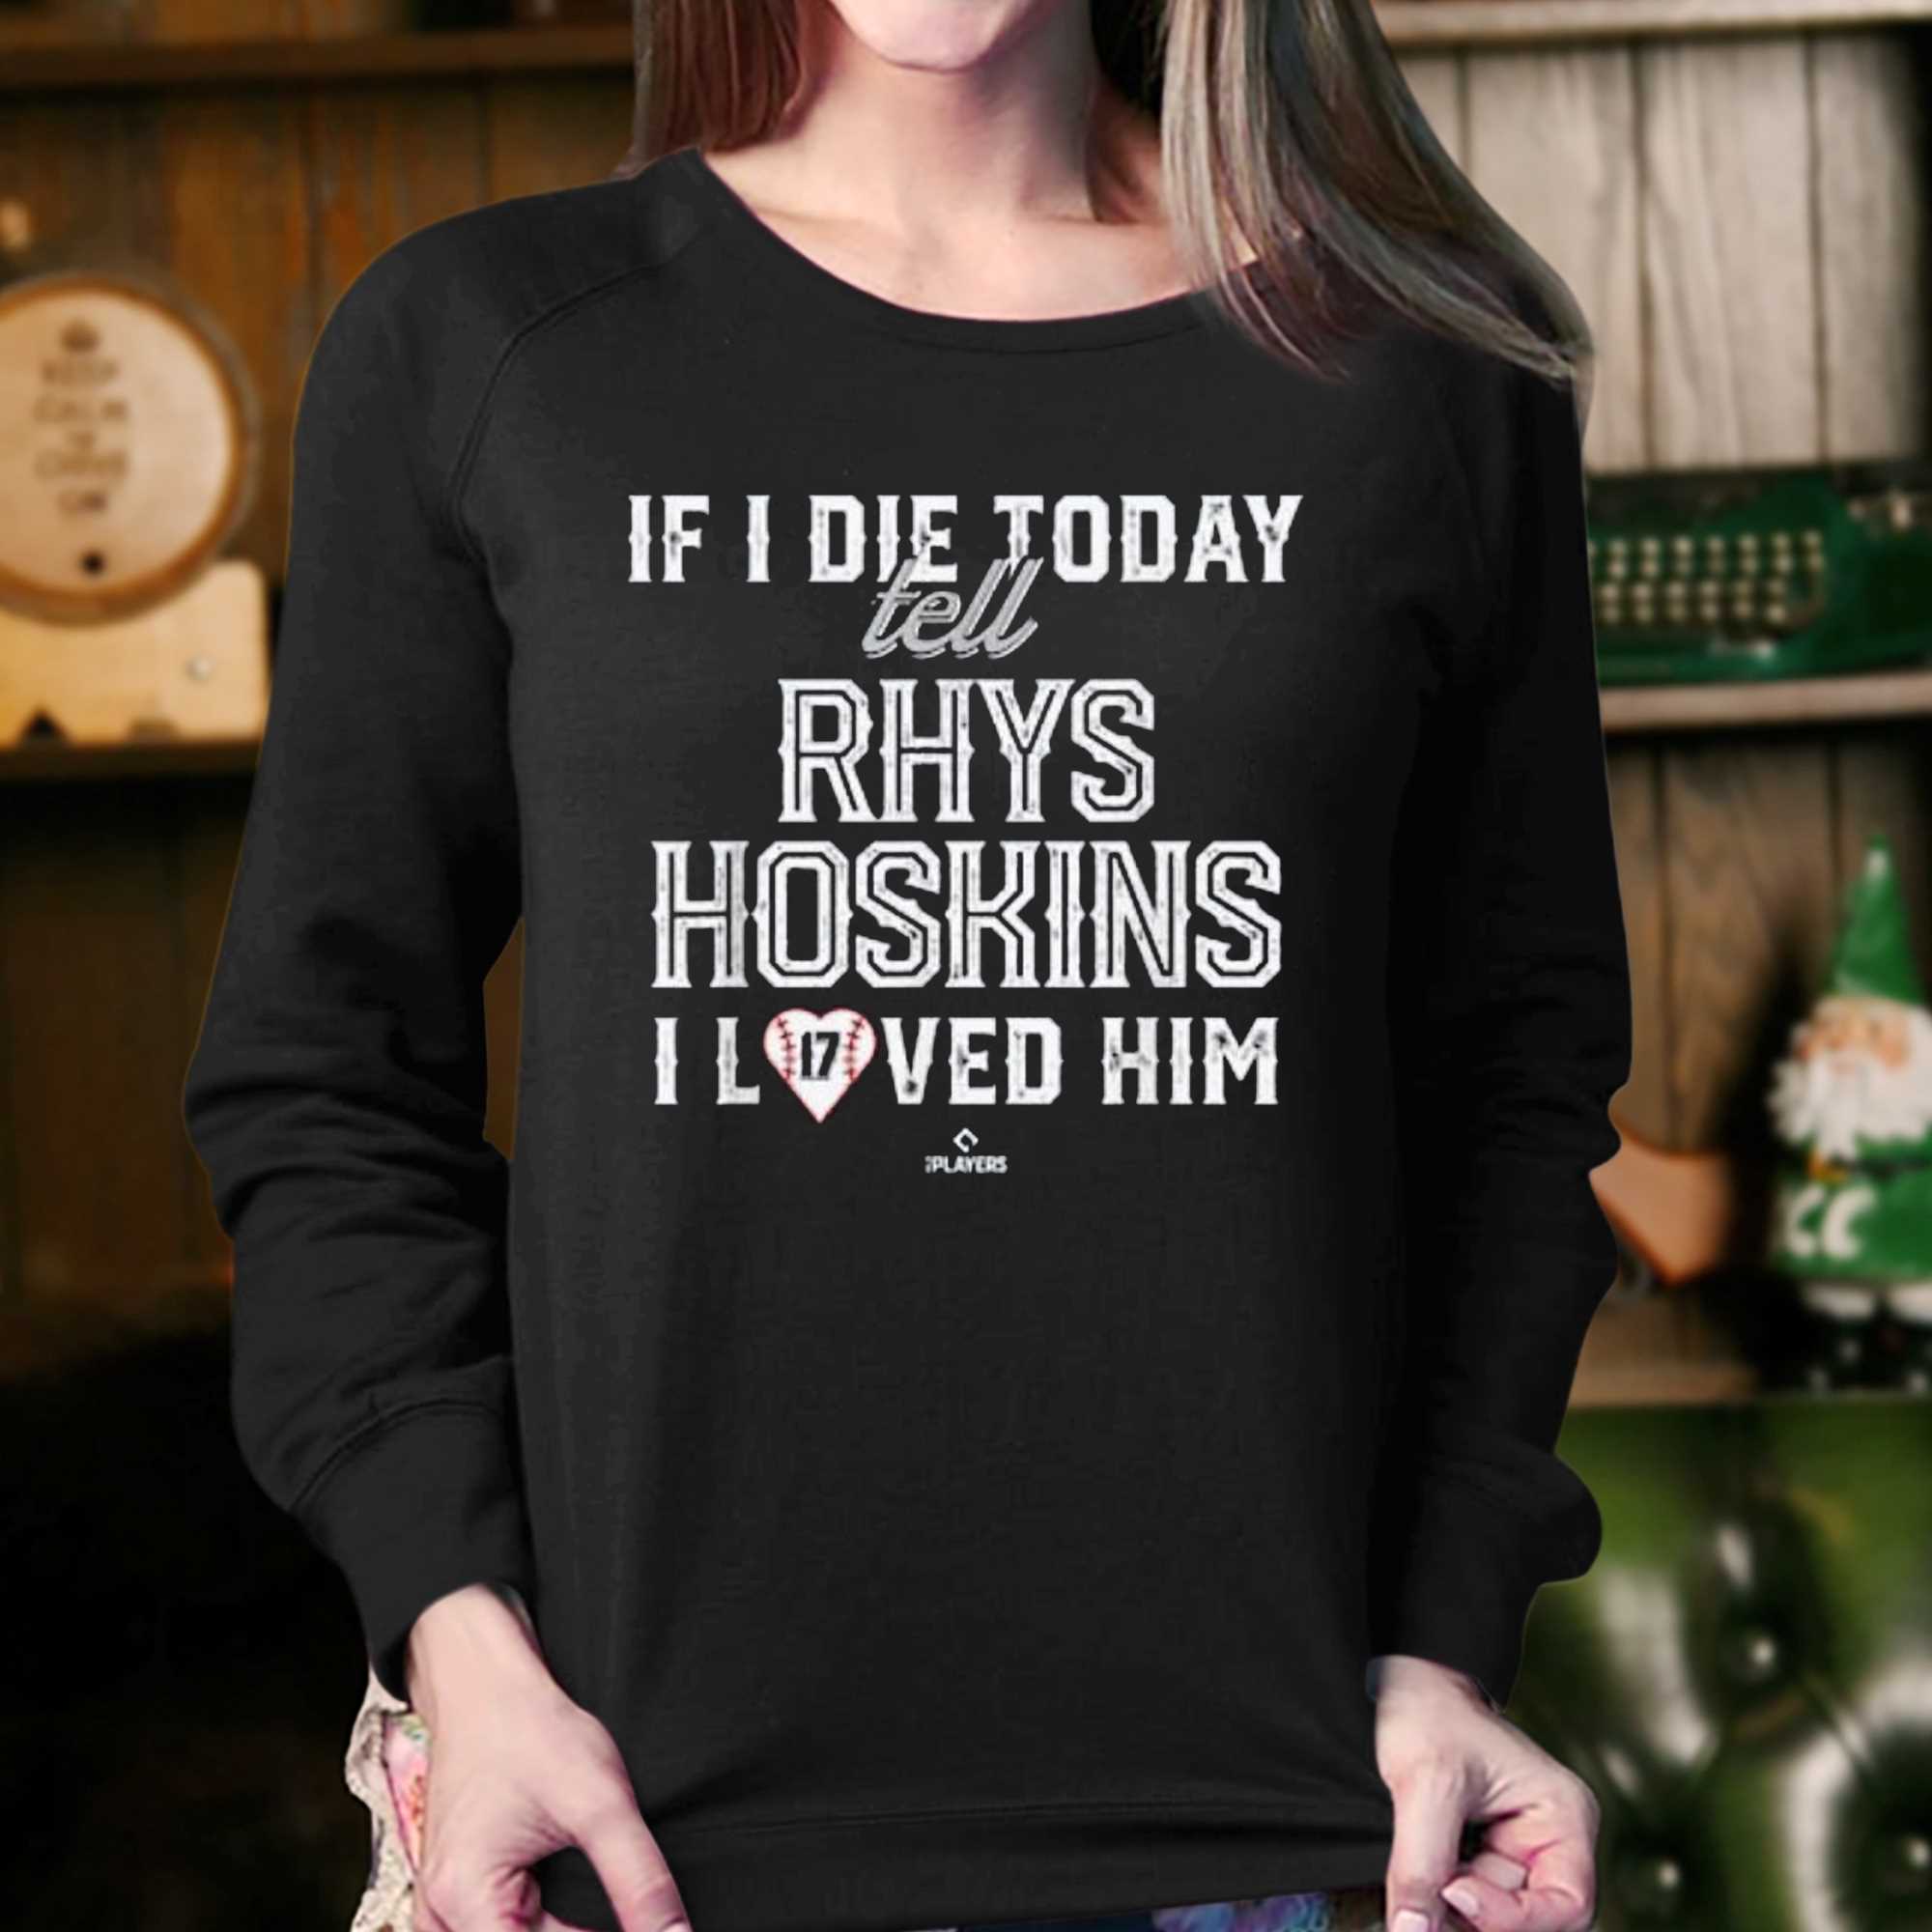 If I Die Today Tell Rhys Hoskins I Loved Him Shirt